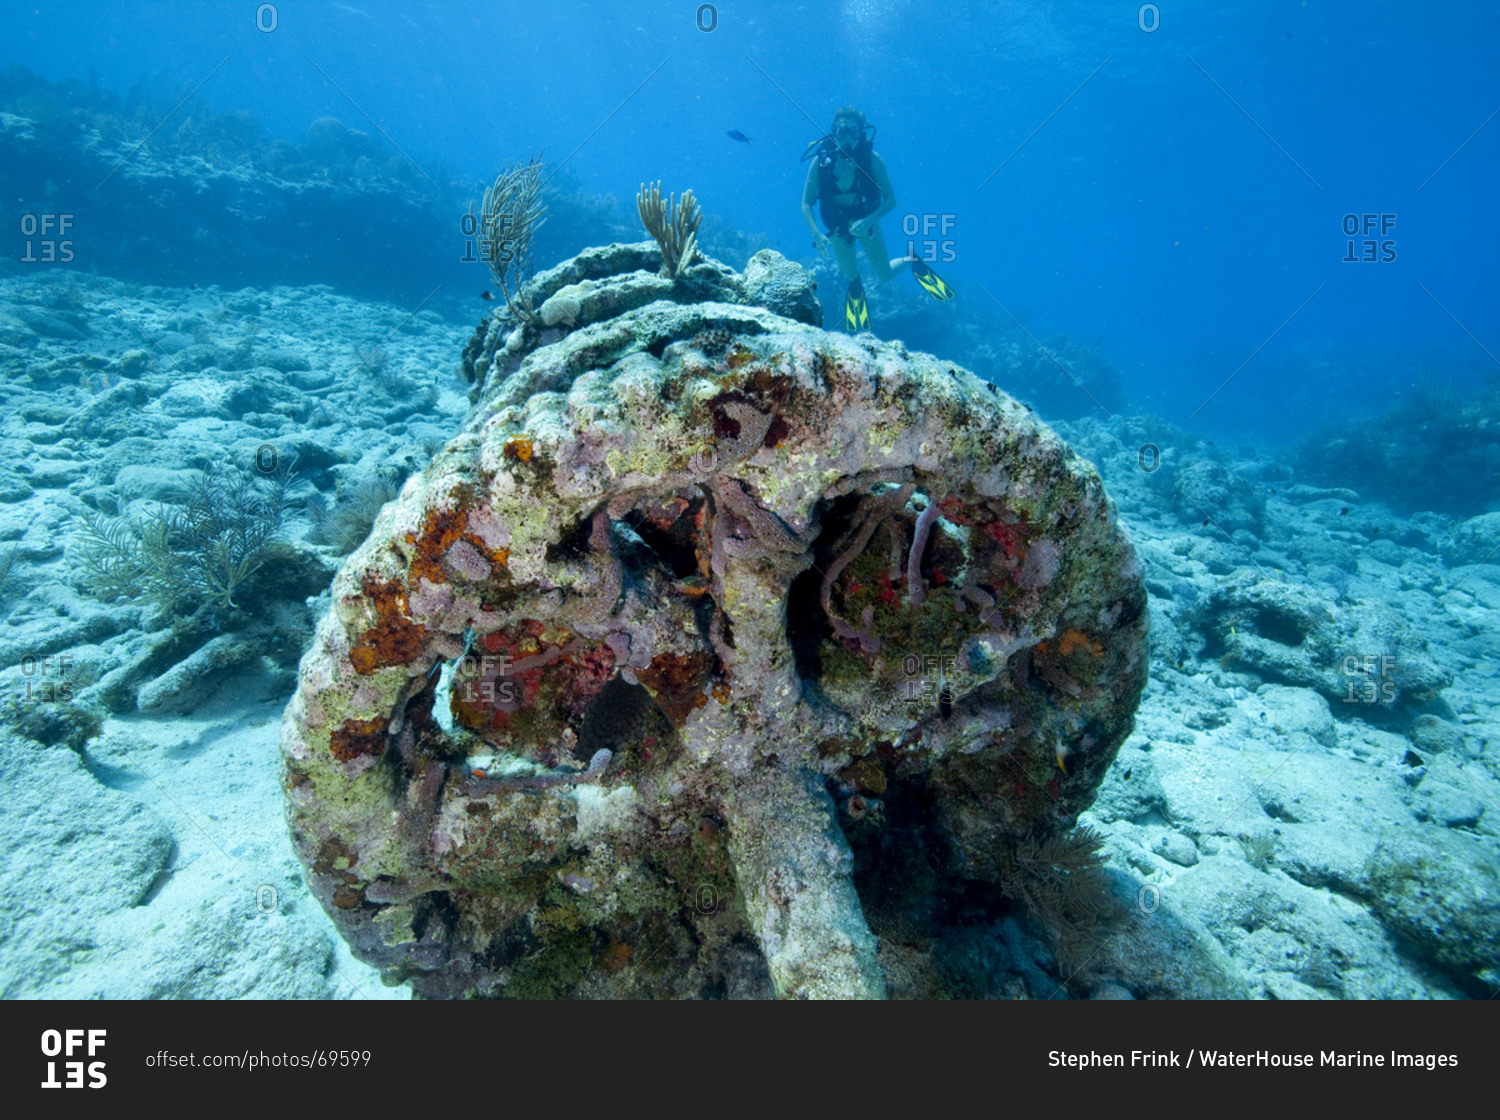 Teenage scuba diver approaches a set of winch gears located at a dive site known as the 